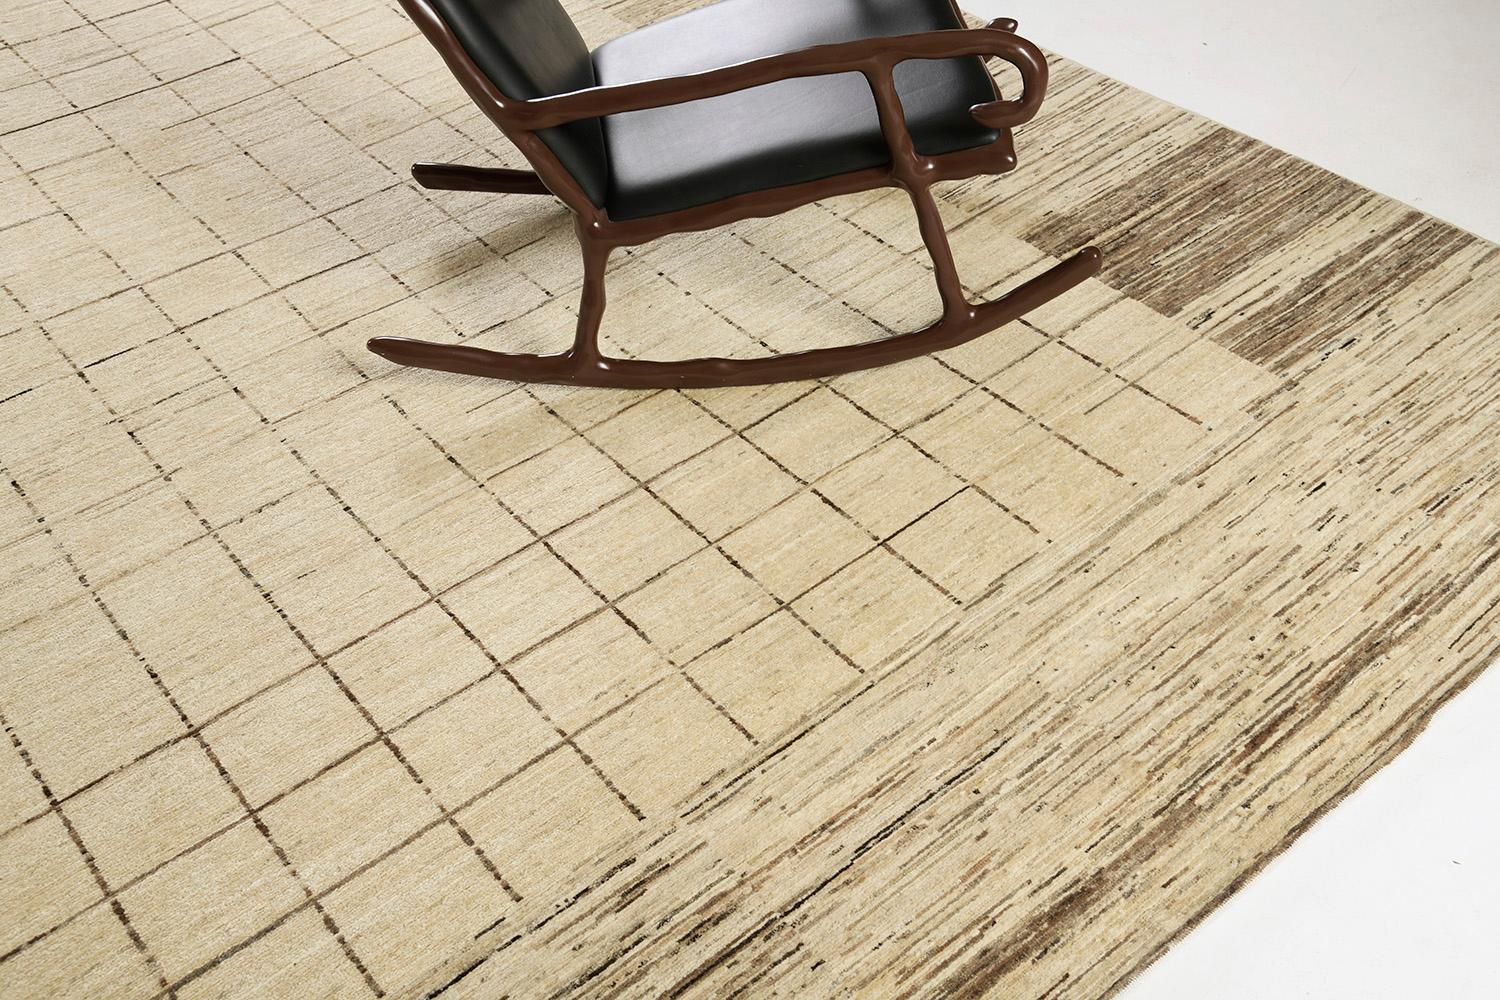 Matta' is an alluring modern design rug in Naturale collection that features a minimalist square pattern that's sure to add interest to any space. Its elegant design coordinates well with a wide range of styles and can blend in various ways.